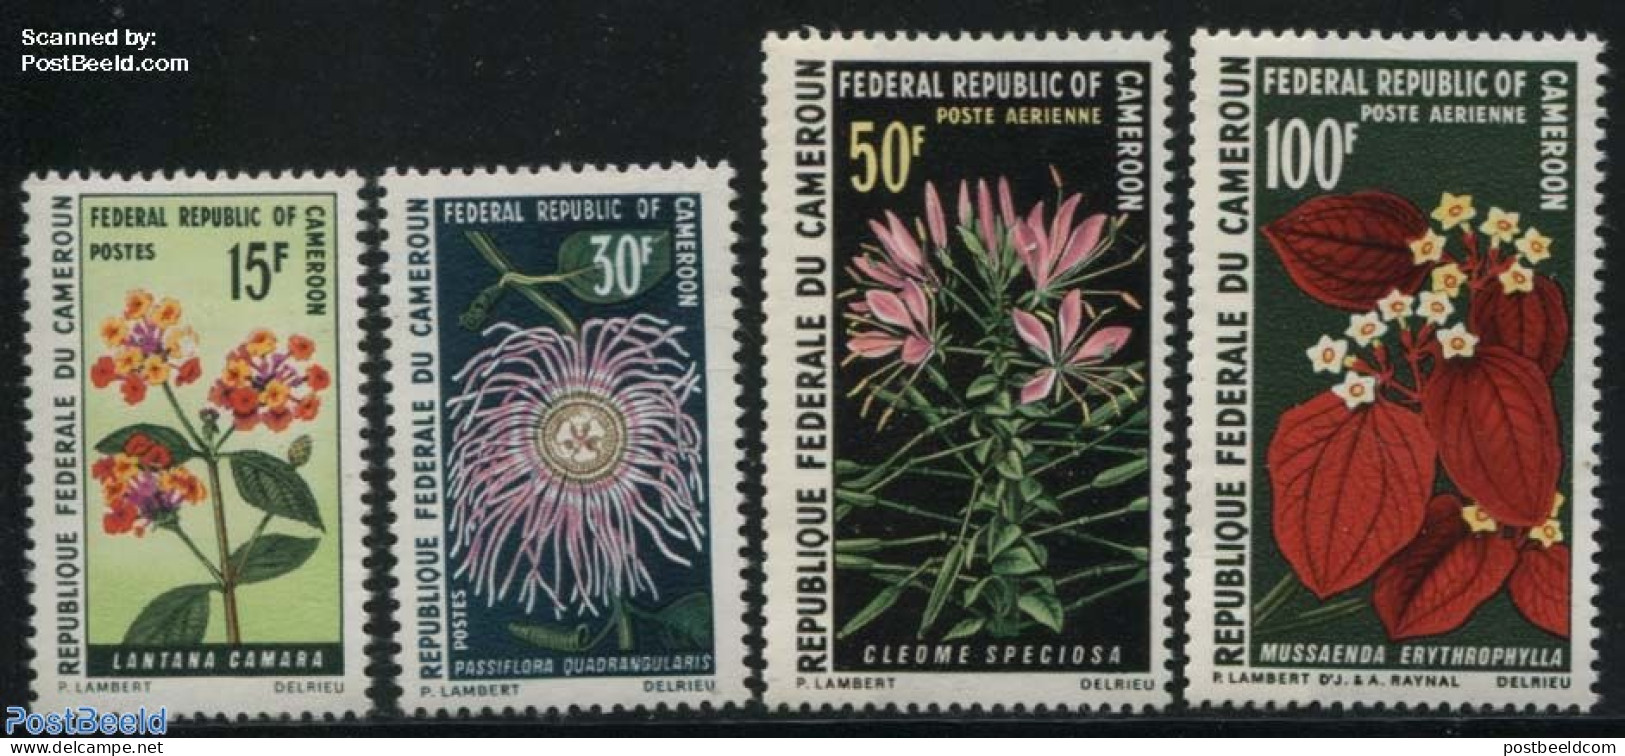 Cameroon 1970 Flowers 4v, Mint NH, Nature - Flowers & Plants - Camerún (1960-...)